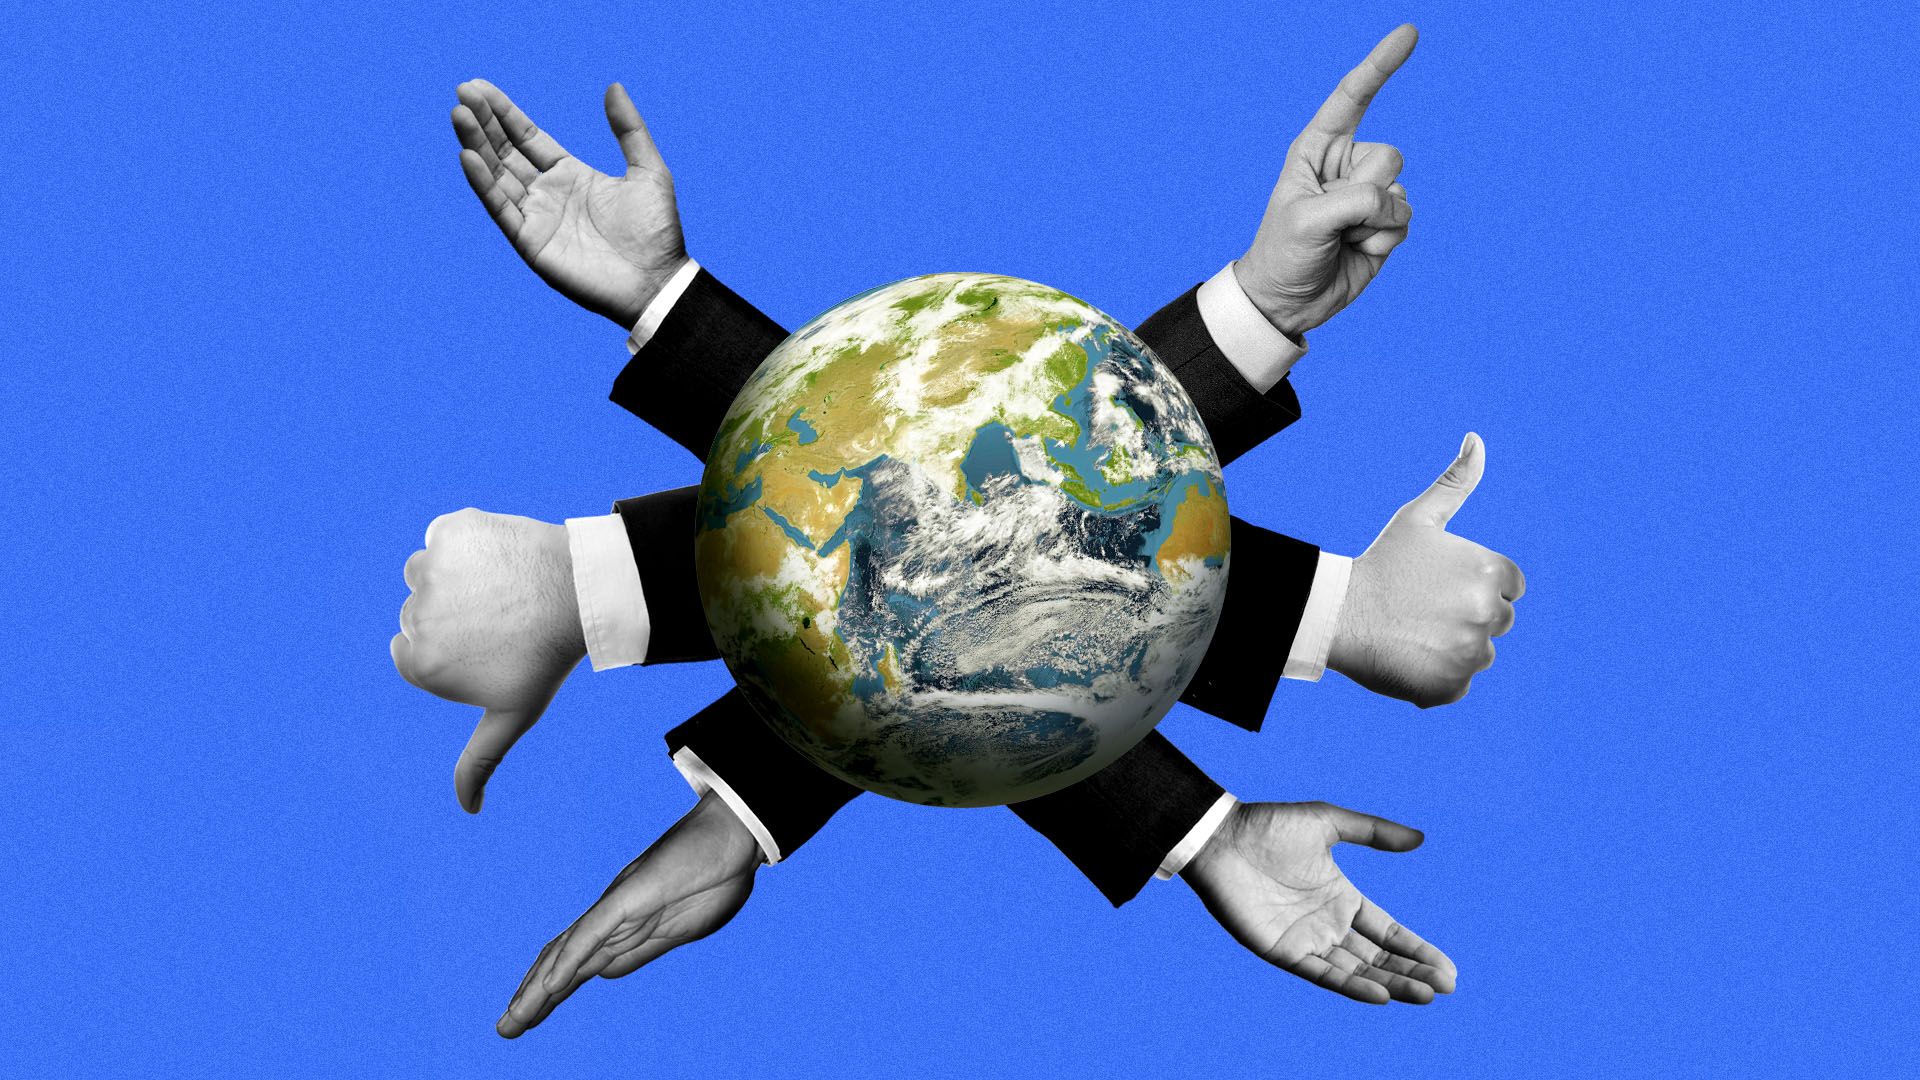 Illustration of a globe with multiple hands pointing out from behind it making different signs